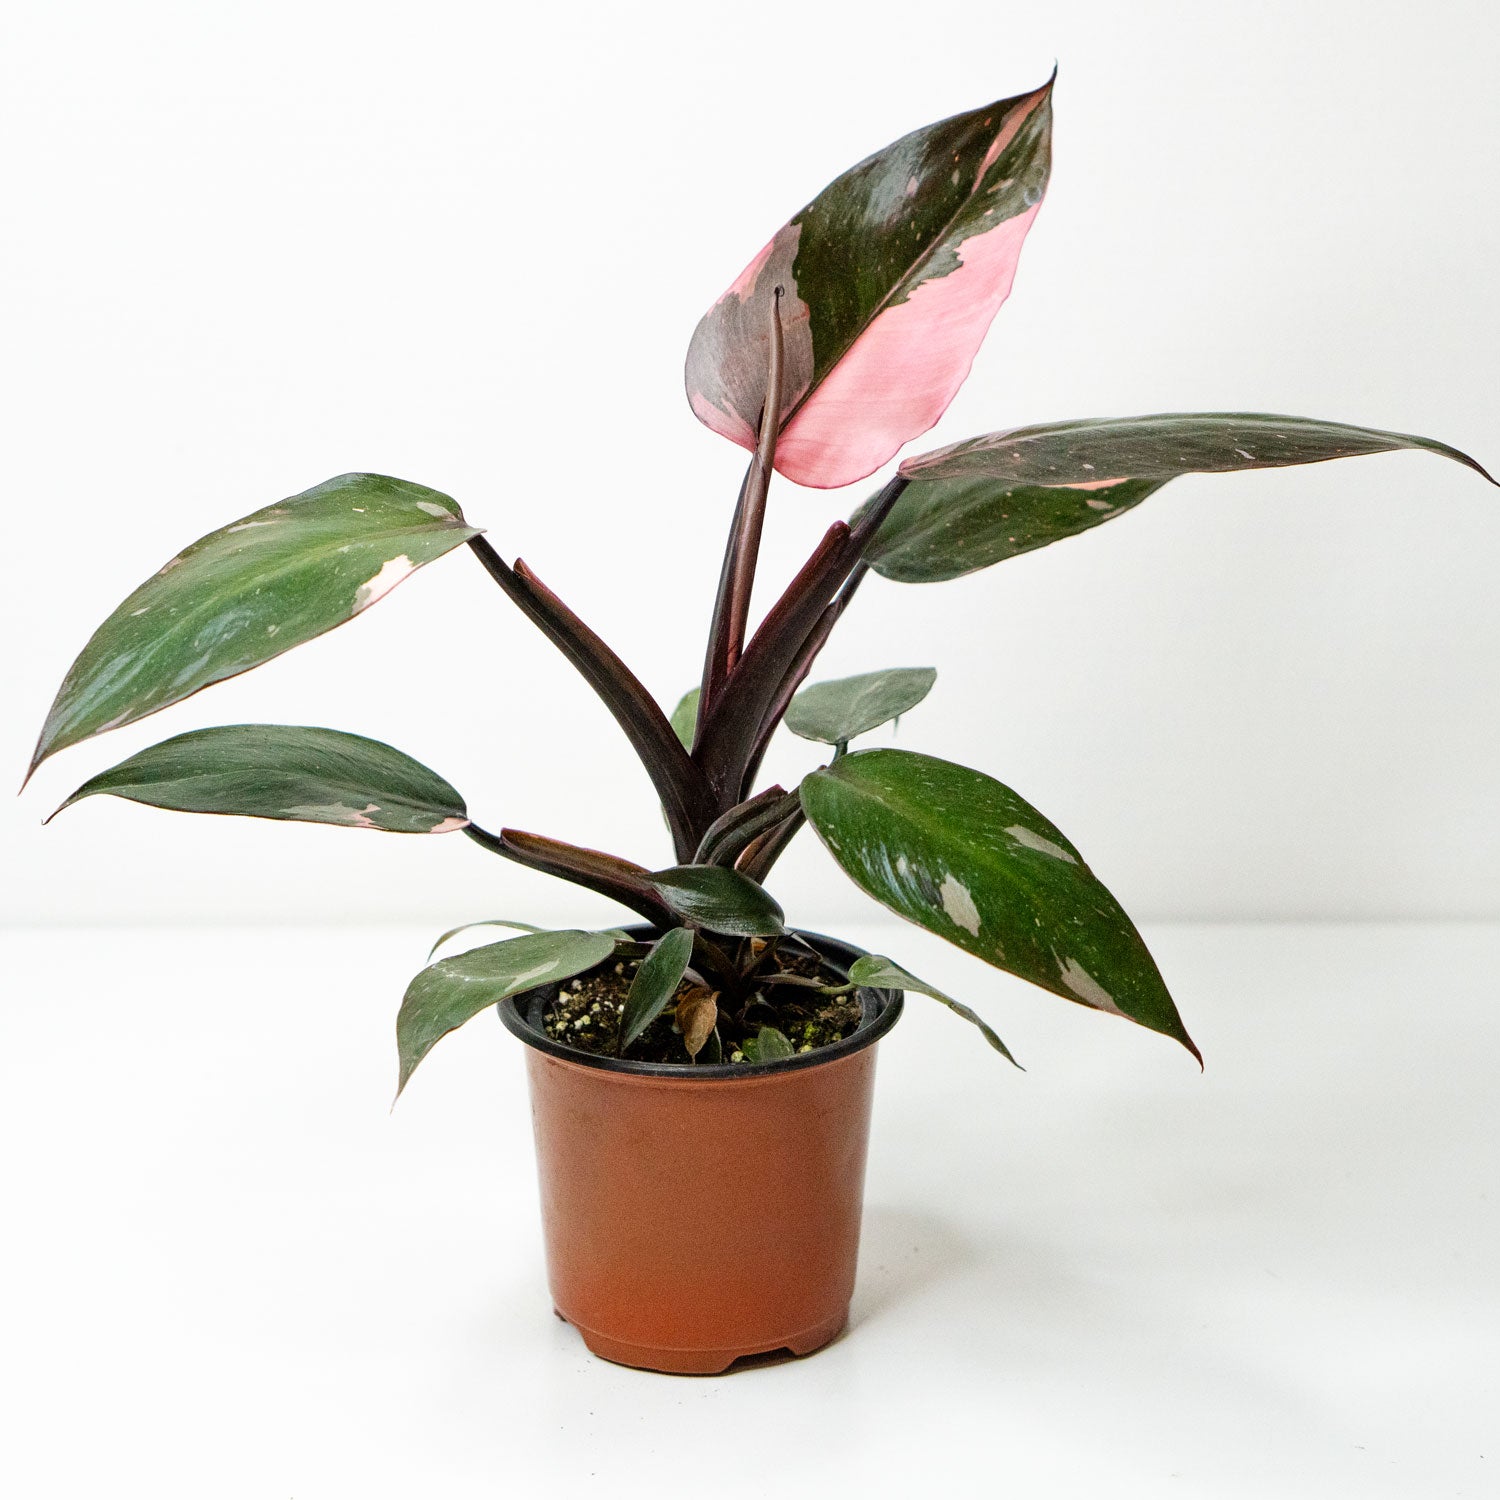 Potted rare Houseplant with pink leaves Phillodendron Pink Princess 4.5” - Buy repotted rare indoor plant Philodendron Pink Princess for delivery at Planteia